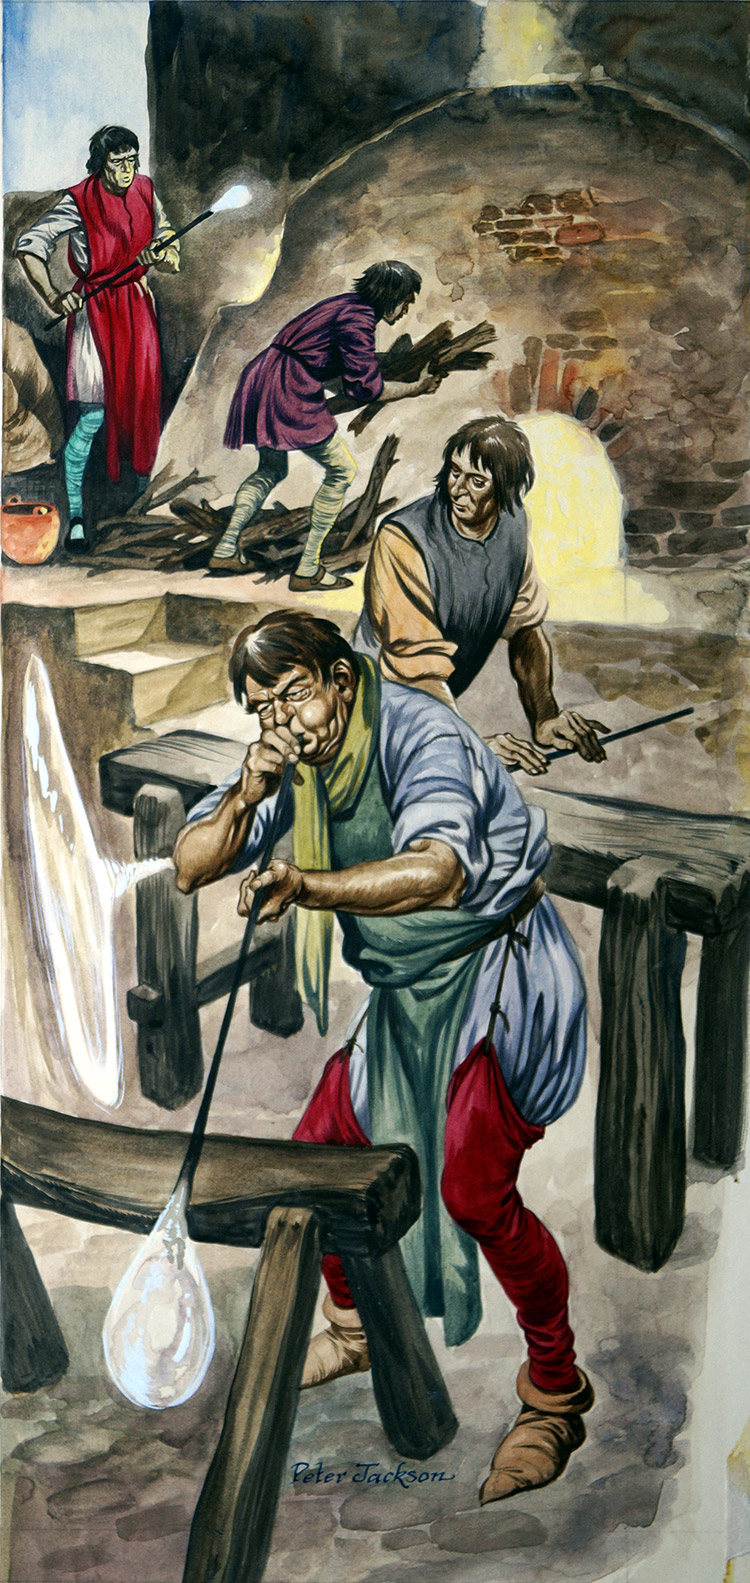 Glass Blowing (Original) (Signed) art by British History (Peter Jackson) at The Illustration Art Gallery